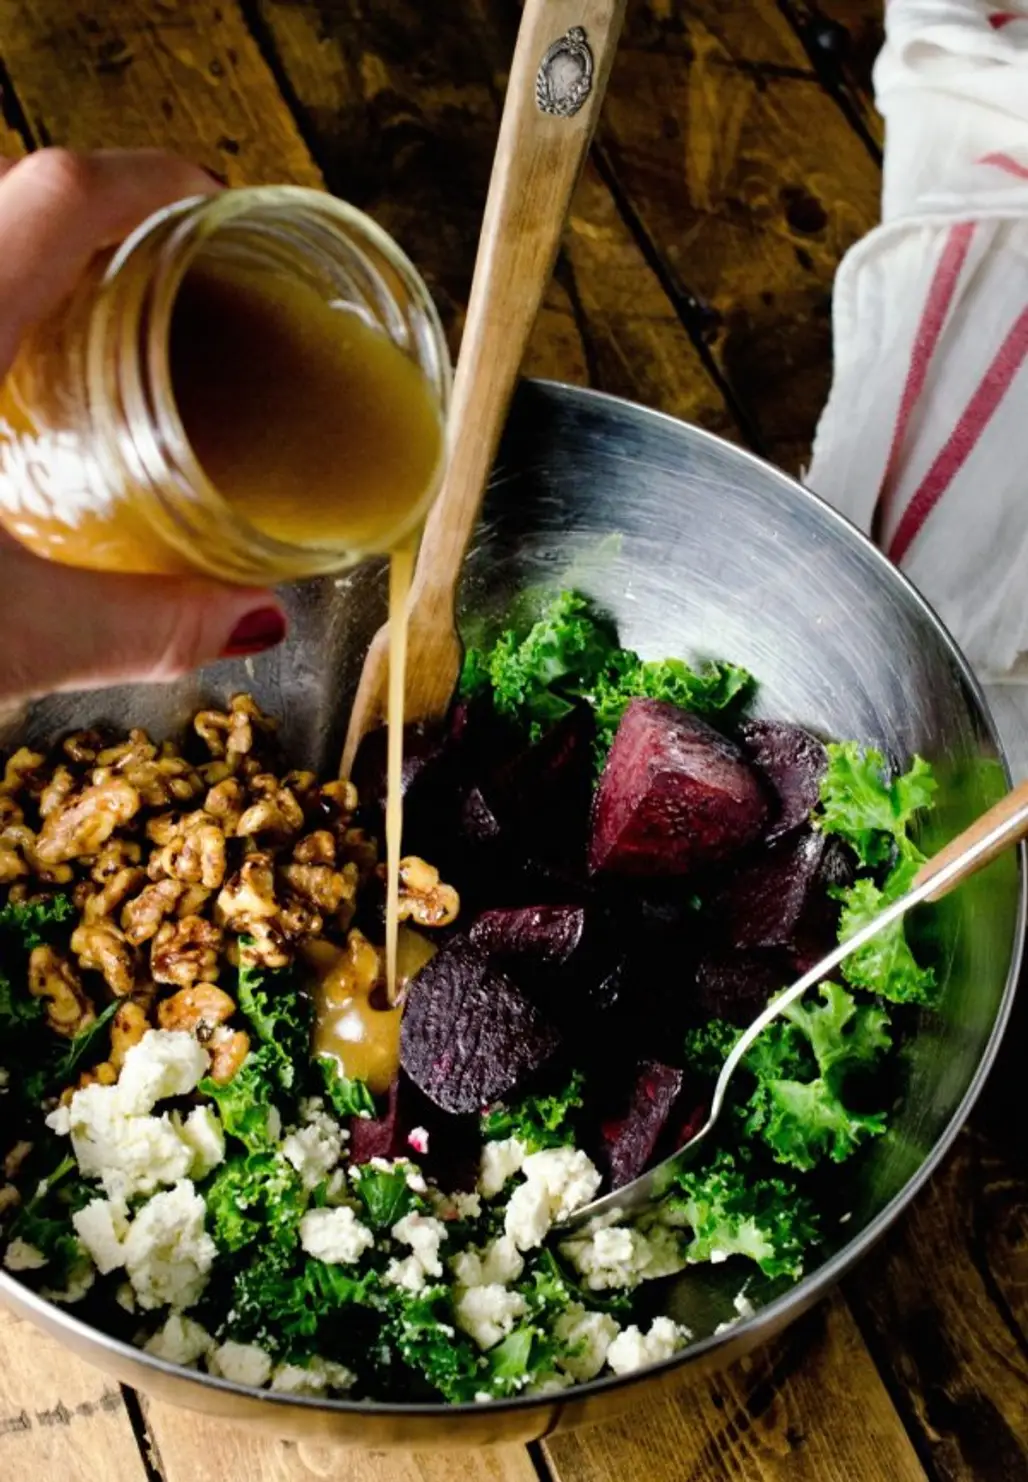 Roasted Beet Kale Salad with Candied Walnuts